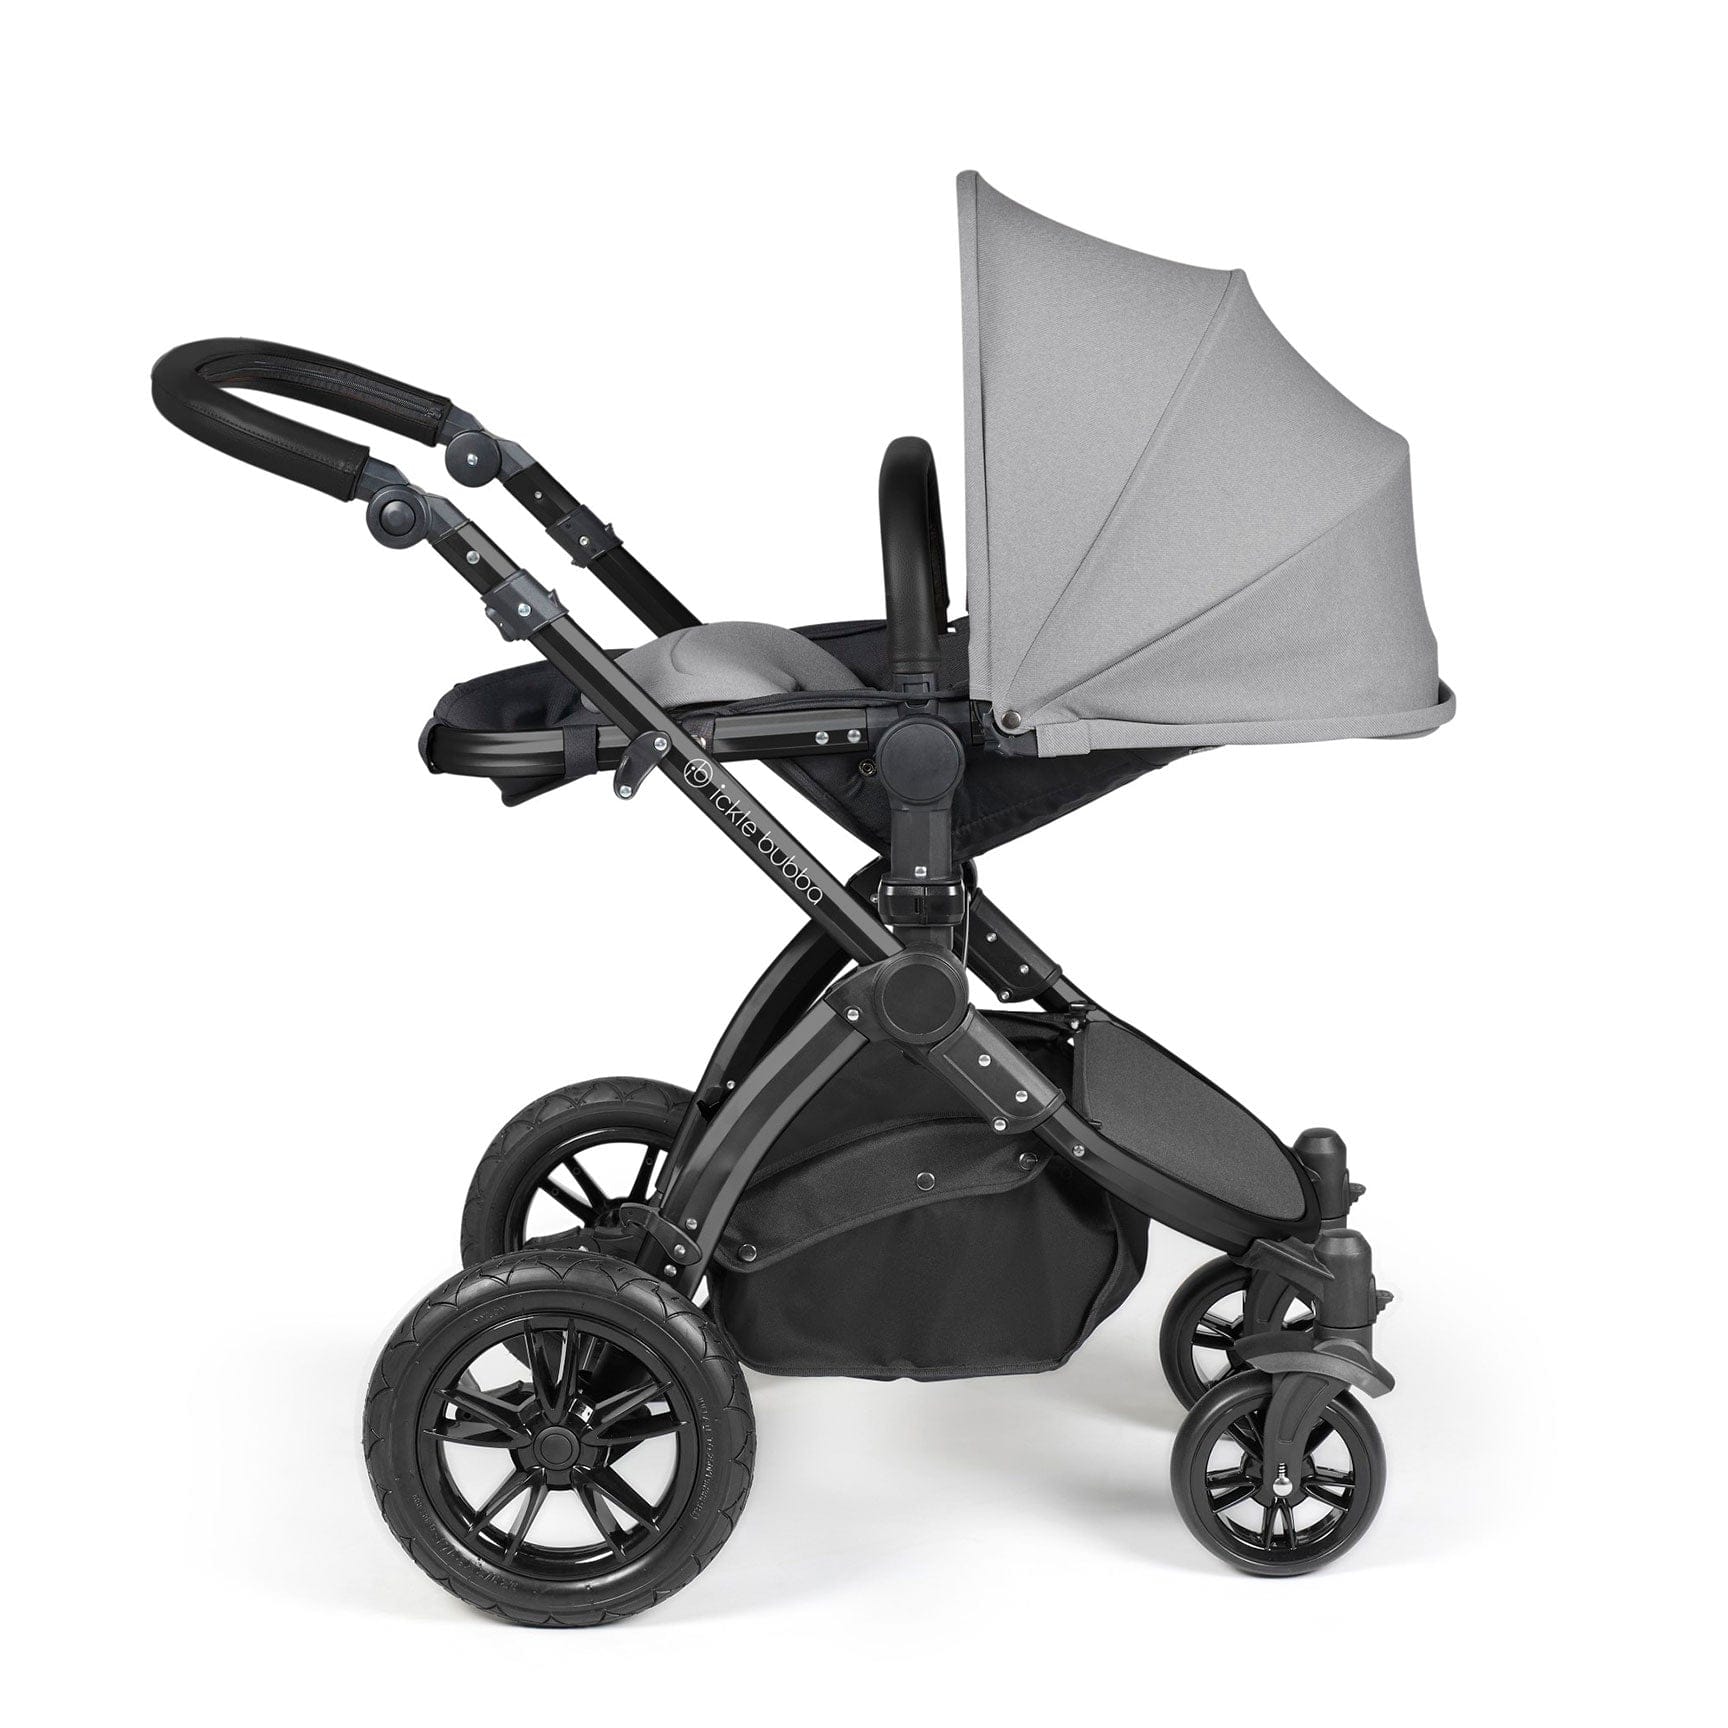 Ickle Bubba travel systems Ickle Bubba Stomp Luxe All-in-One Travel System with Isofix Base - Black/Pearl Grey/Black 10-011-300-210